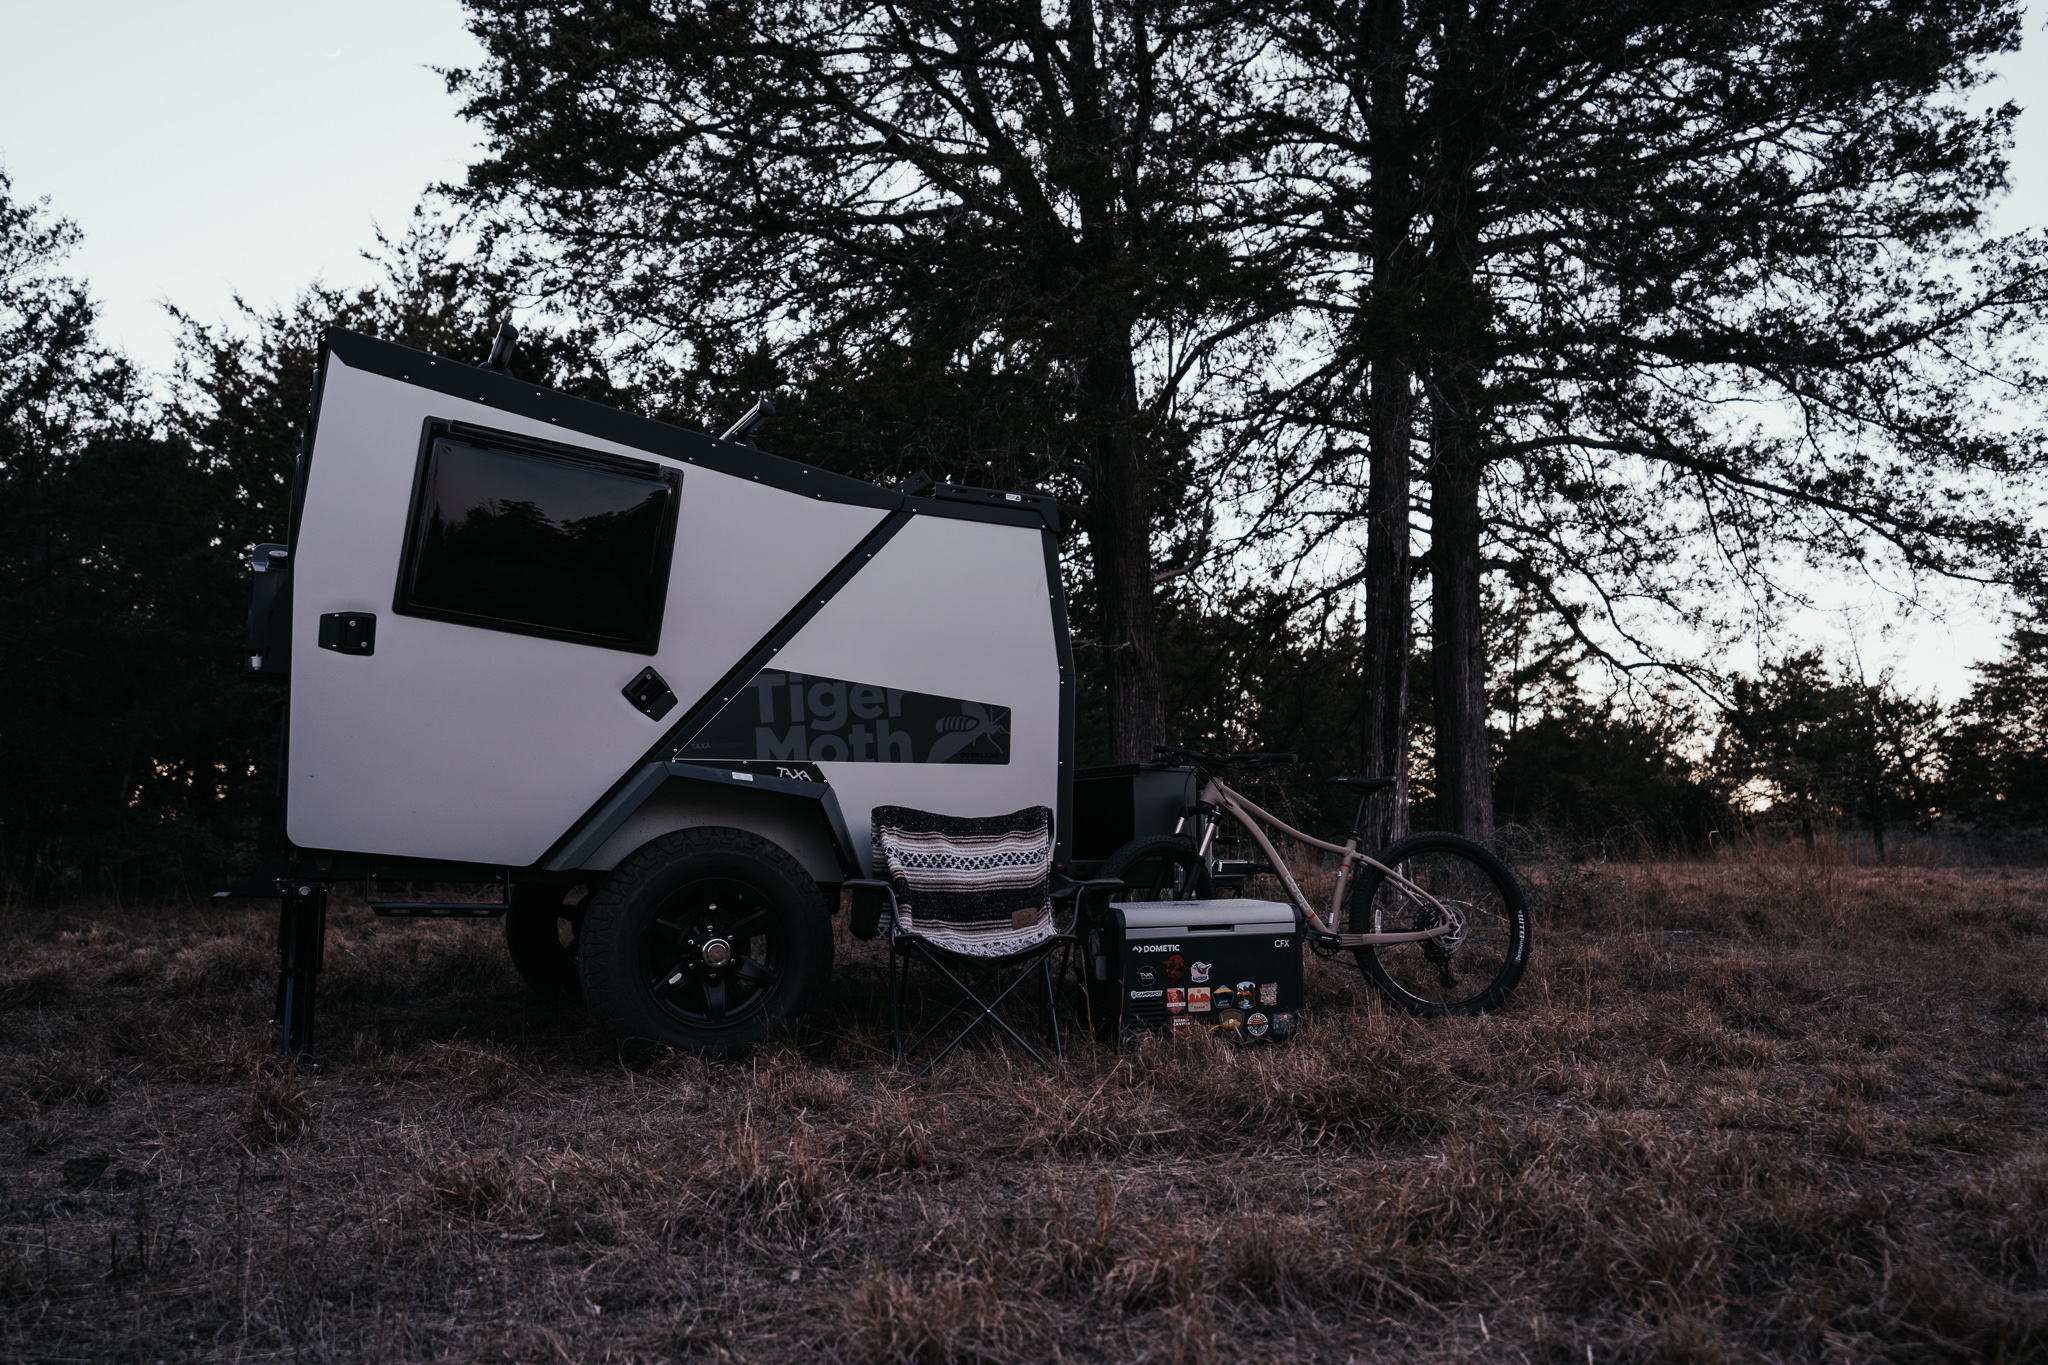 A TAXA TigerMoth Overland camps in the forest at dusk. This is one of the coolest small campers on the market.